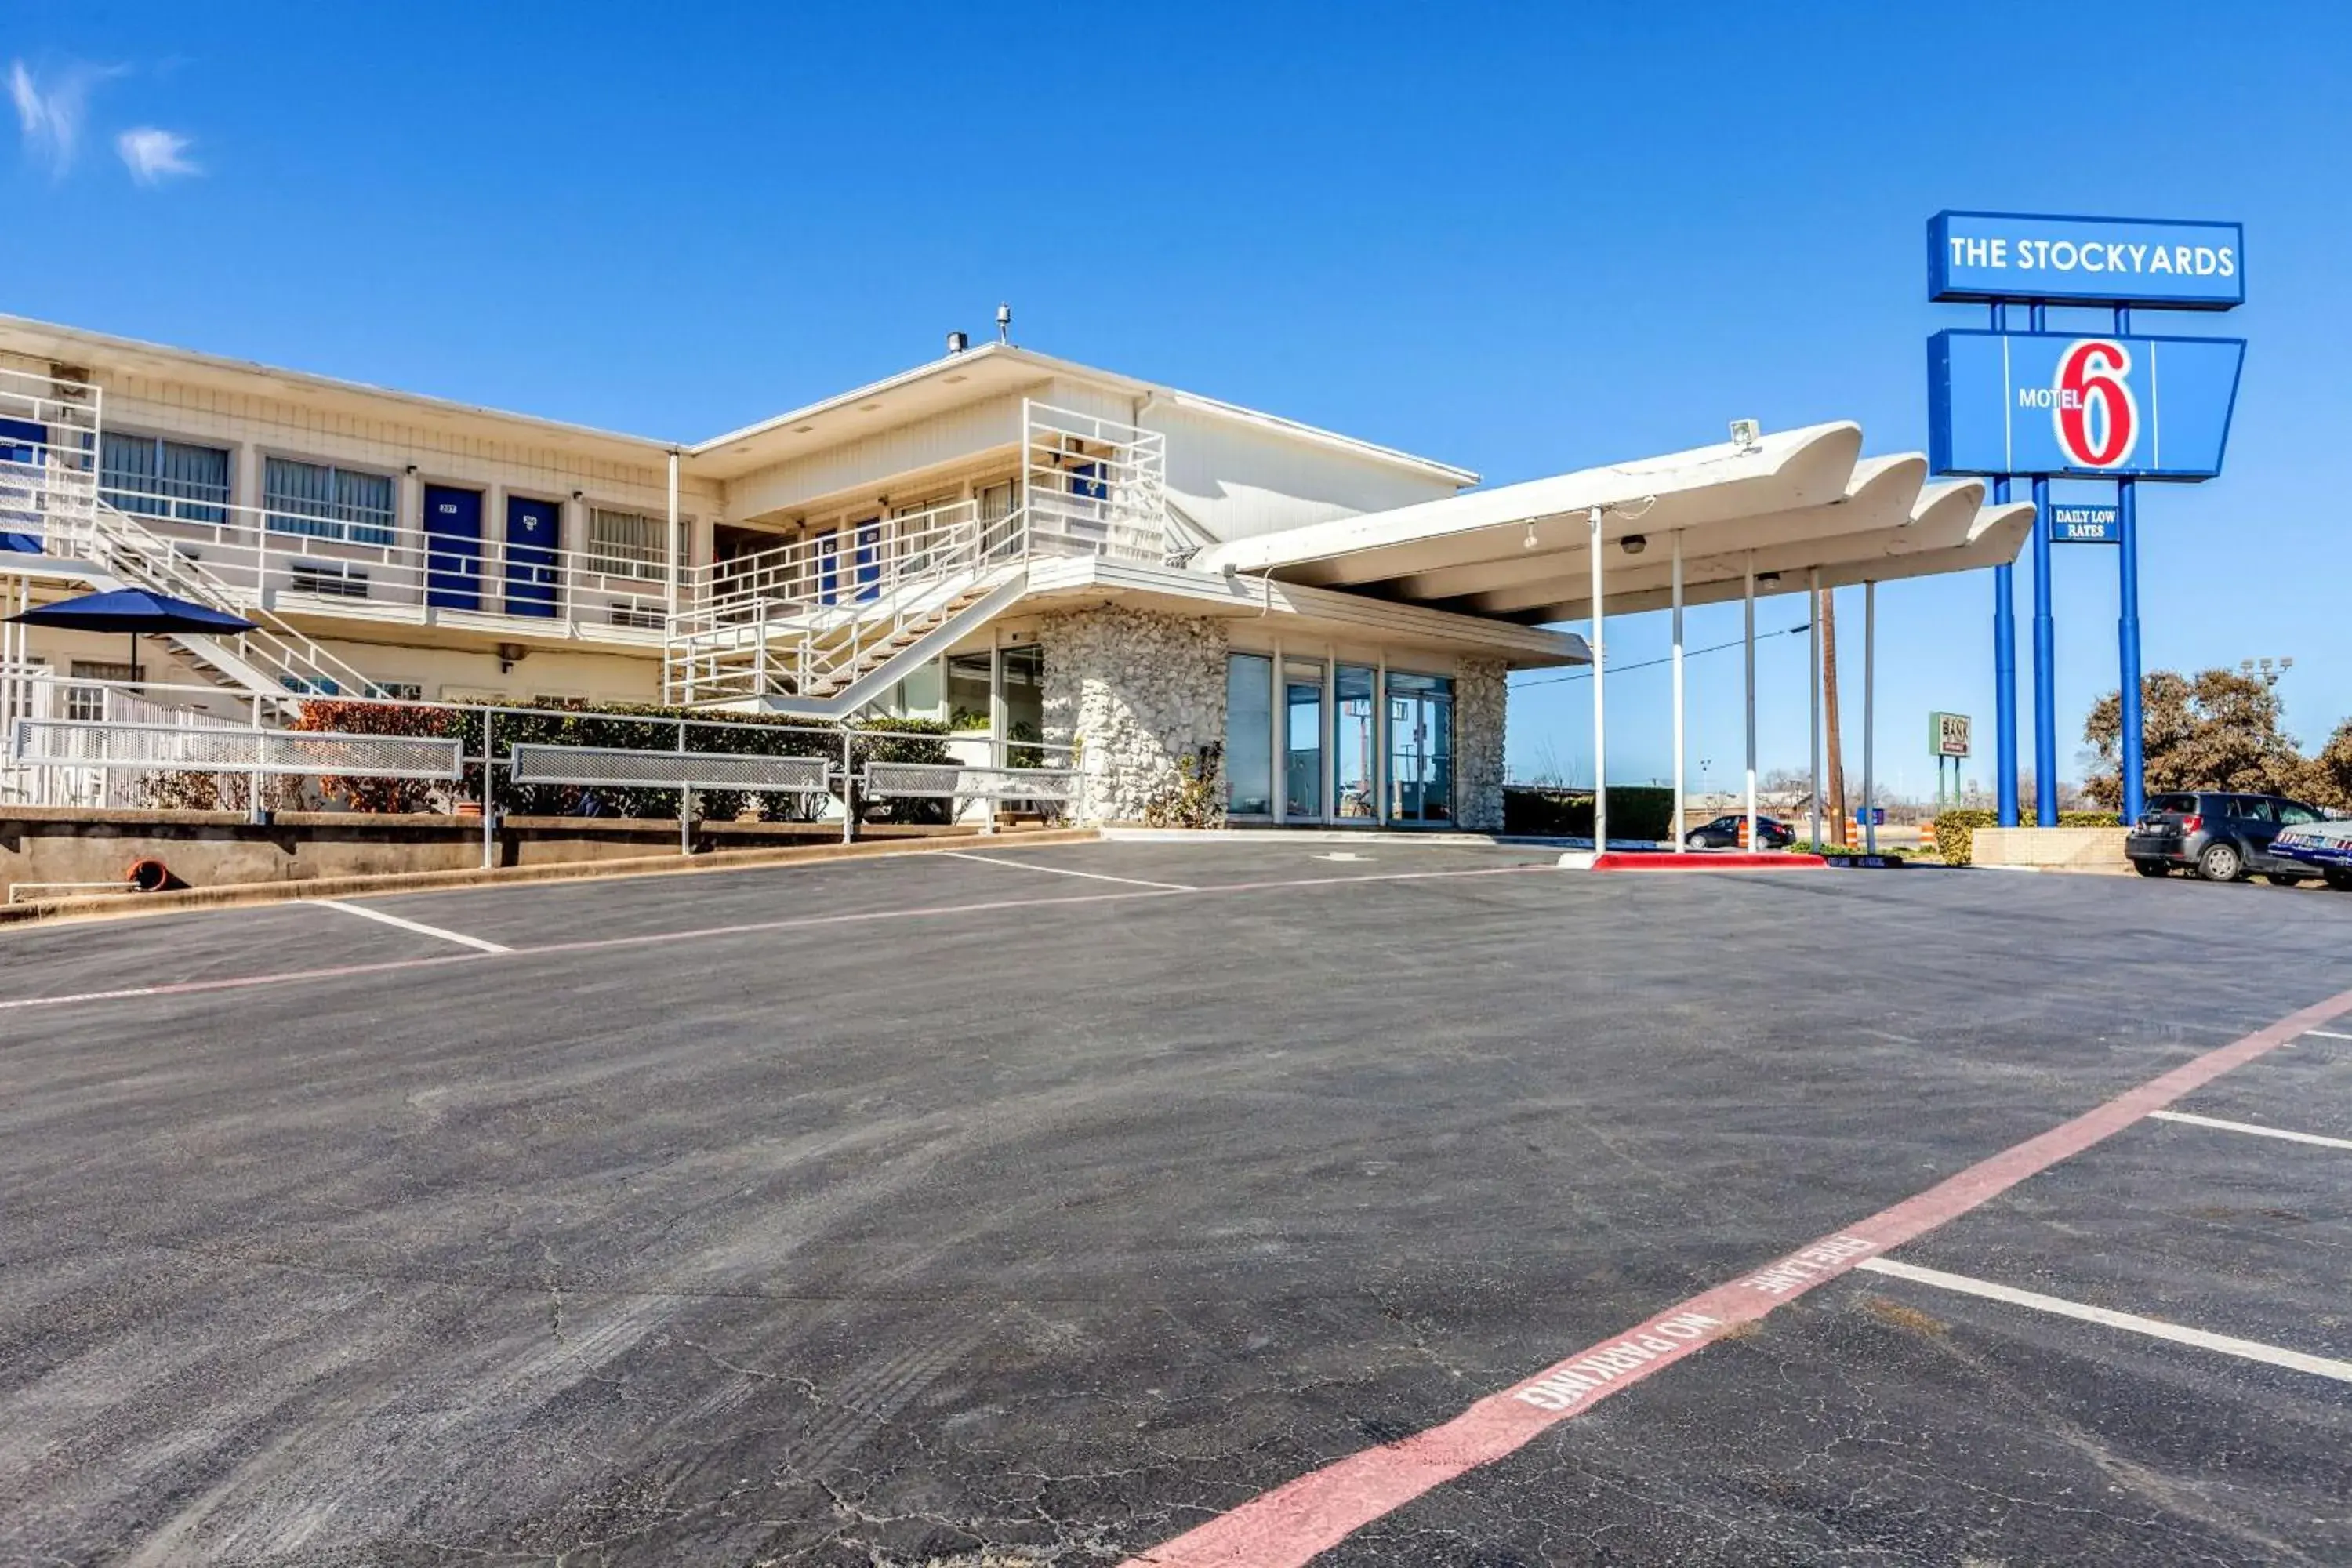 Property Building in Motel 6 Fort Worth, Tx - Stockyards